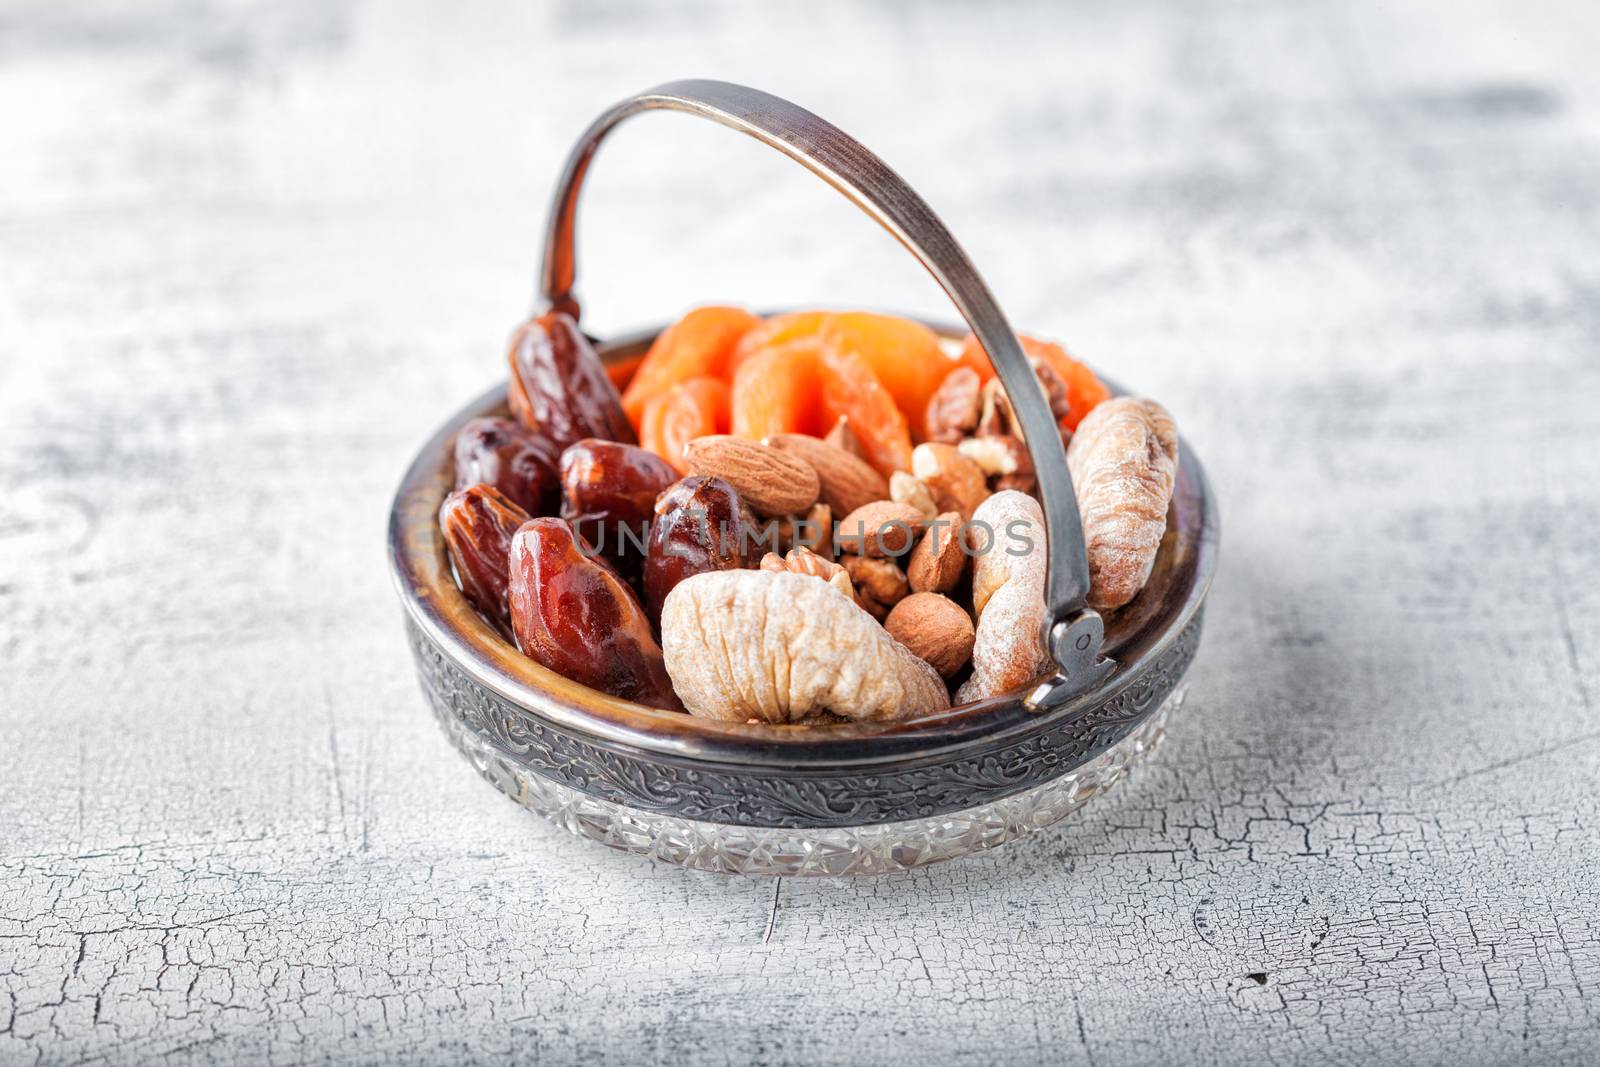 Mixture of dried fruits and nuts on a wooden surface